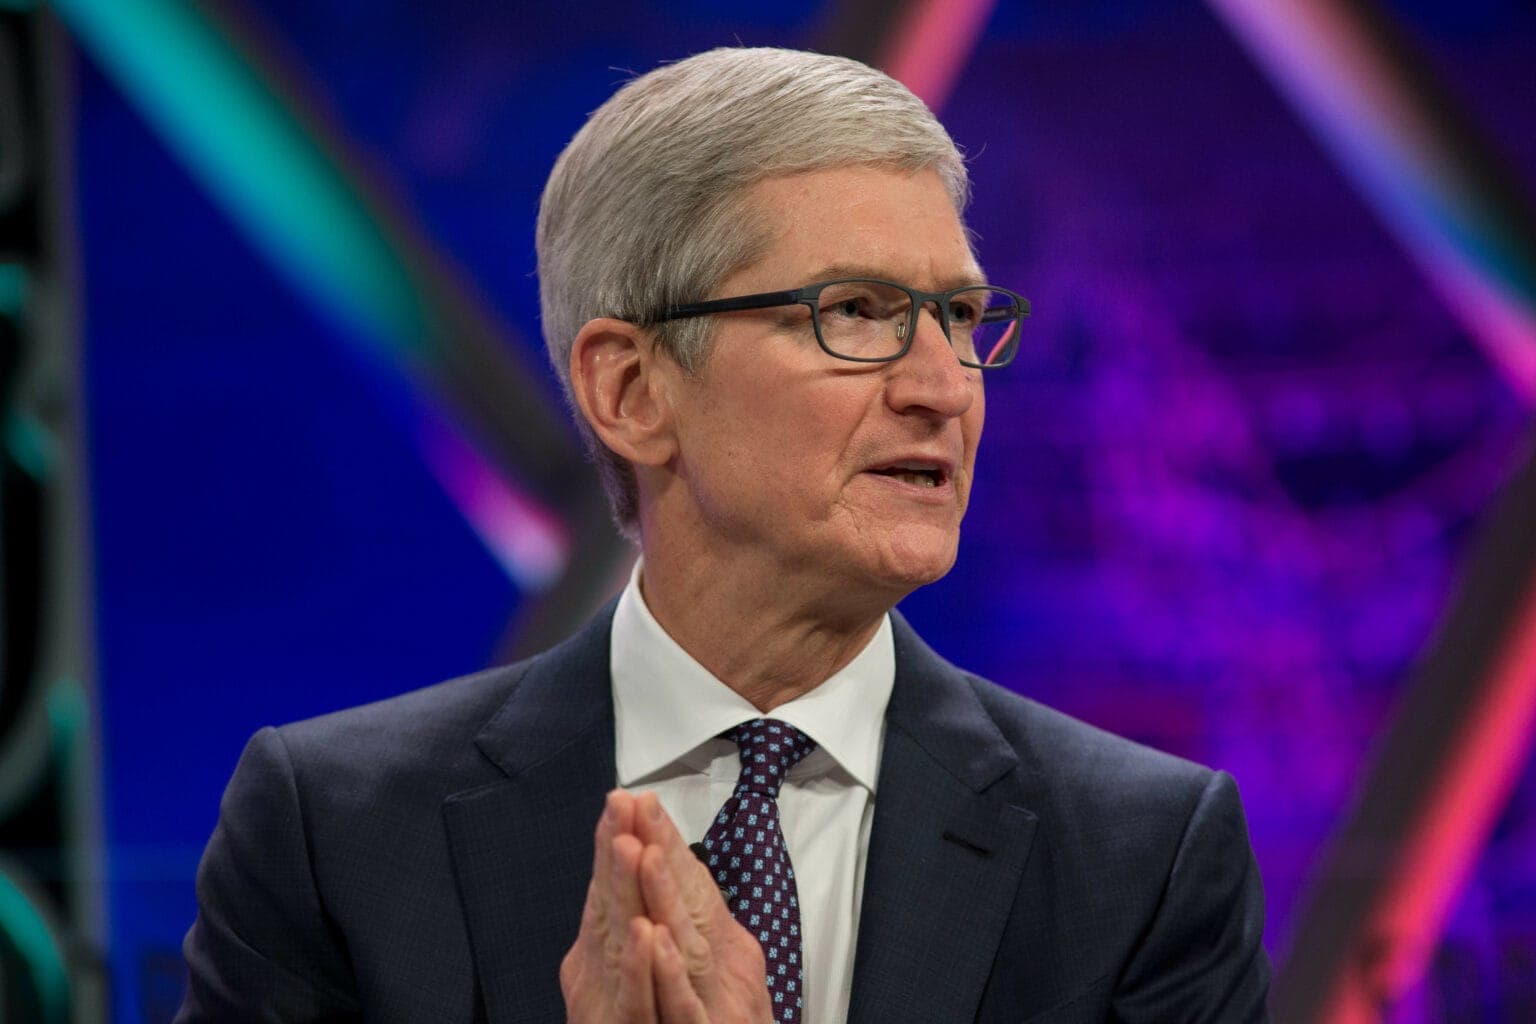 Apple's decision to drop out of the privacy trade group comes ahead of Tim Cook headlining a global privacy summit.